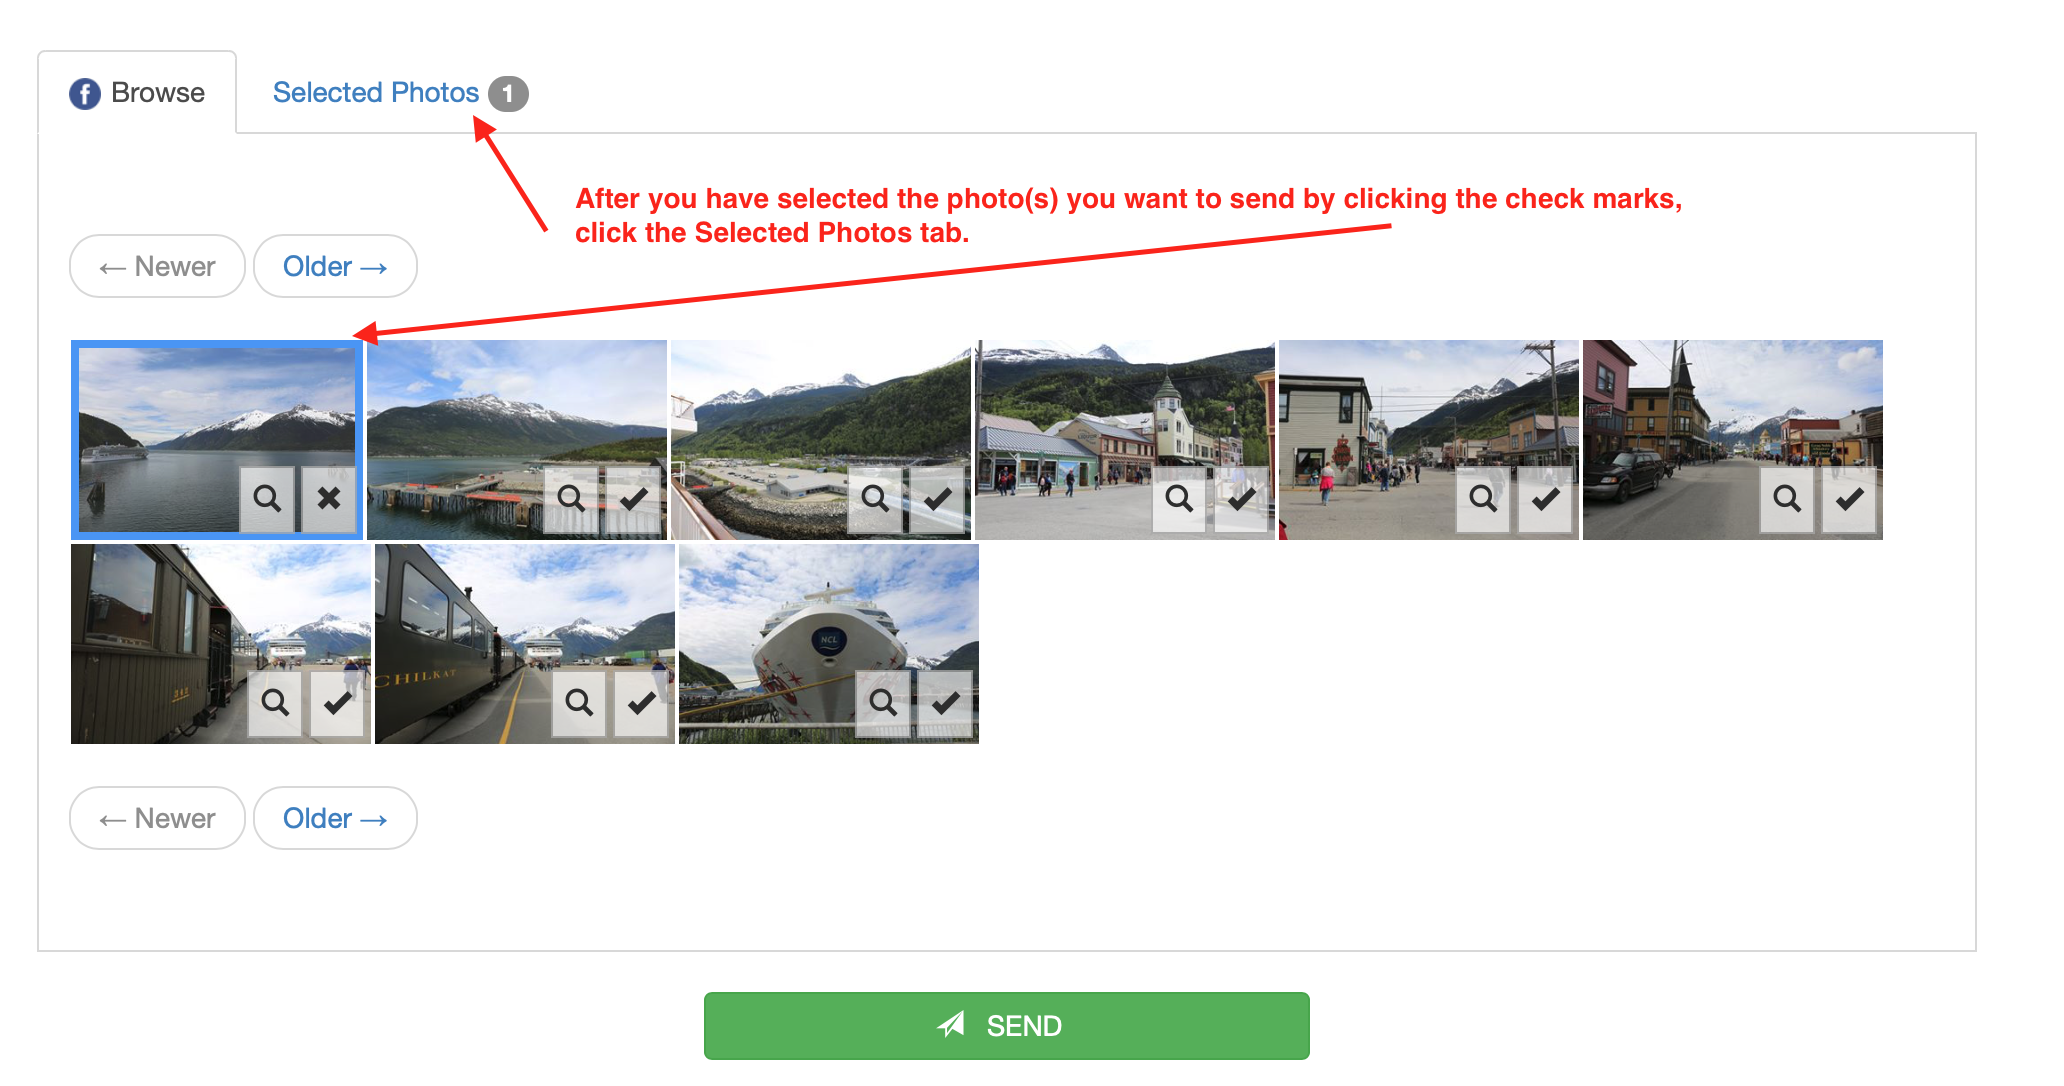 After you have selected the photos you would like to attach, click the Selected Photos tab. 